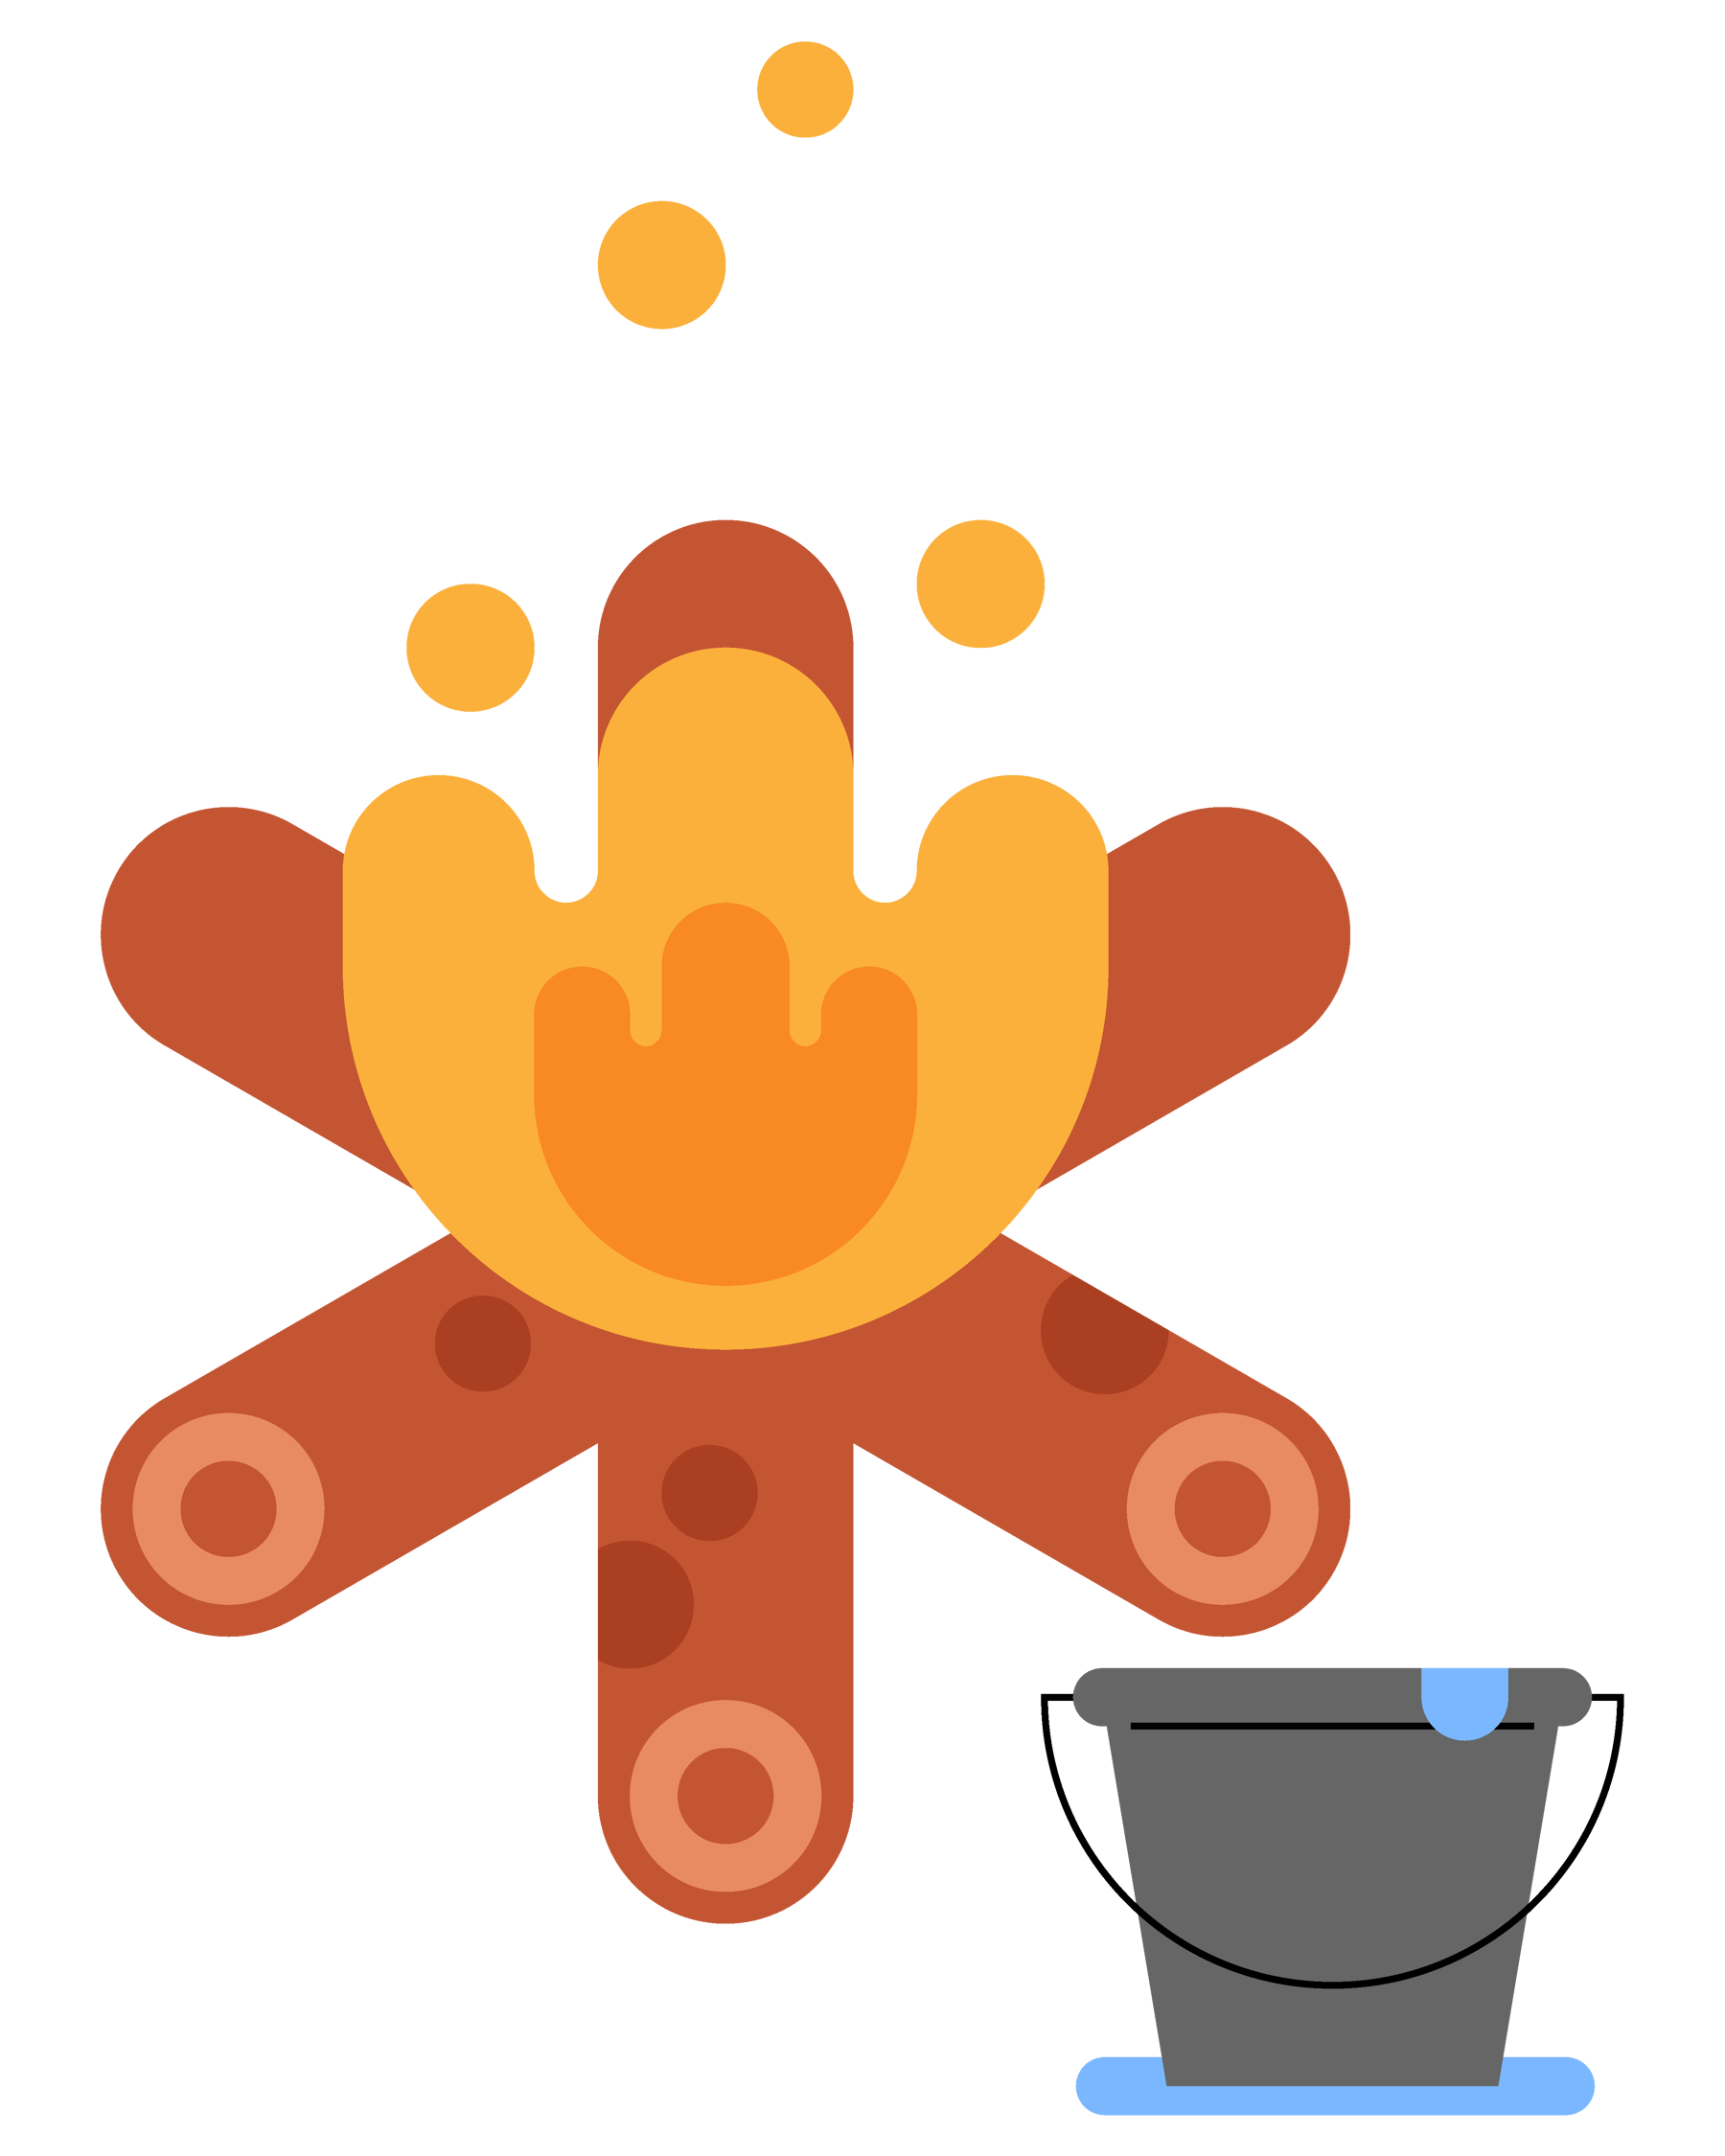 An illustration of a star fire, with a bucket of water placed next to it.